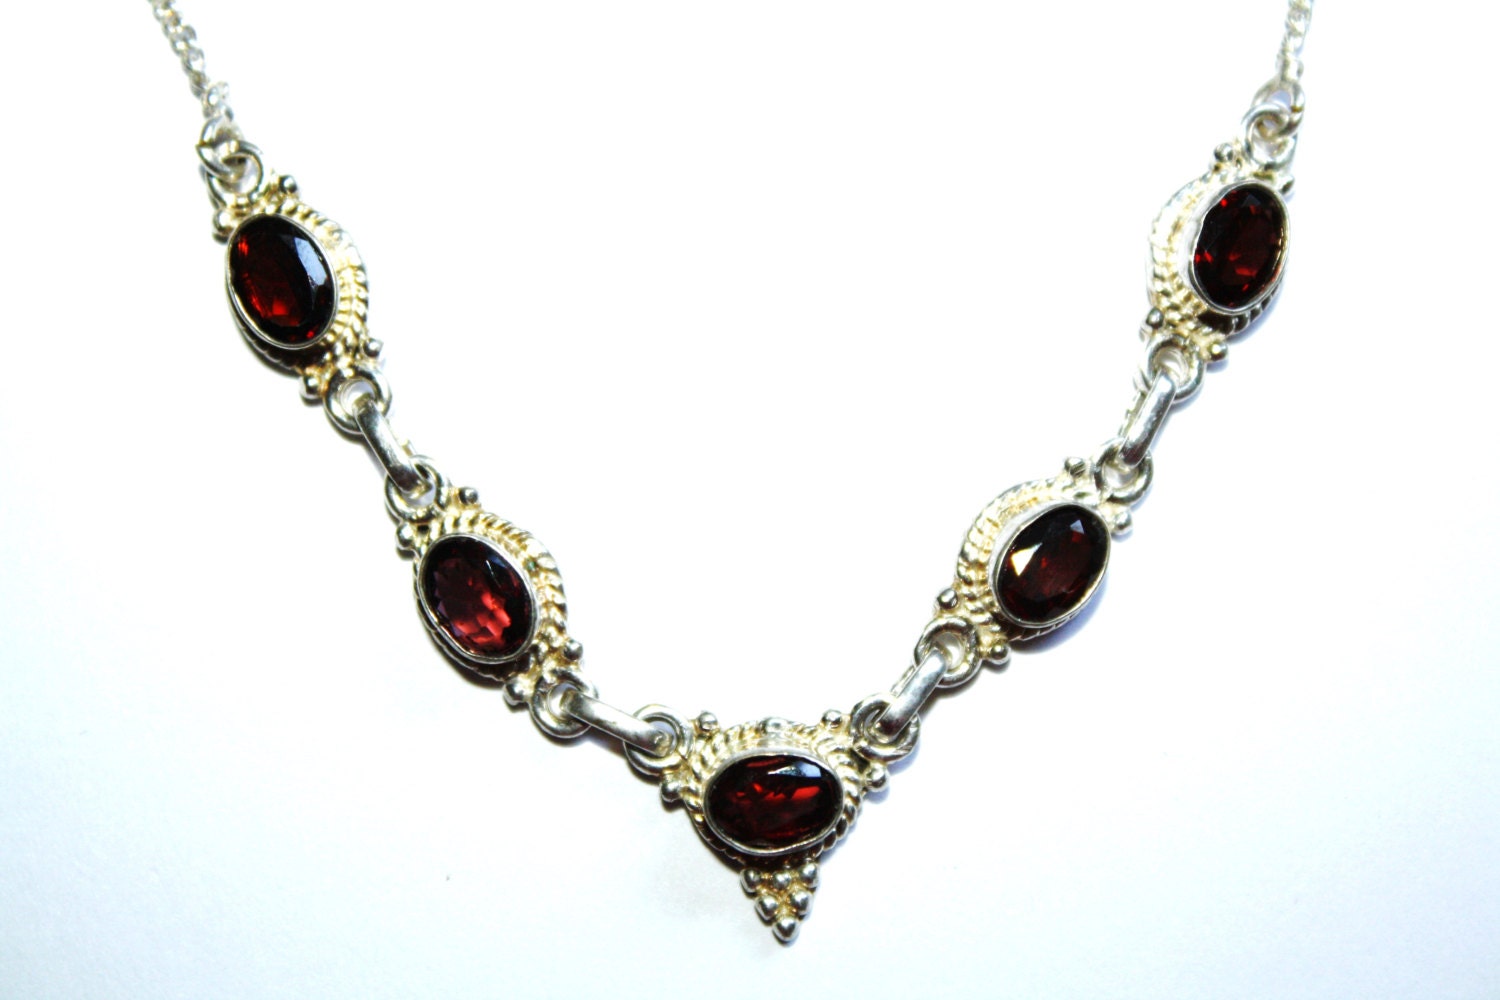 Vintage Sterling Garnet Bali Necklace 17.5 to 19 inches